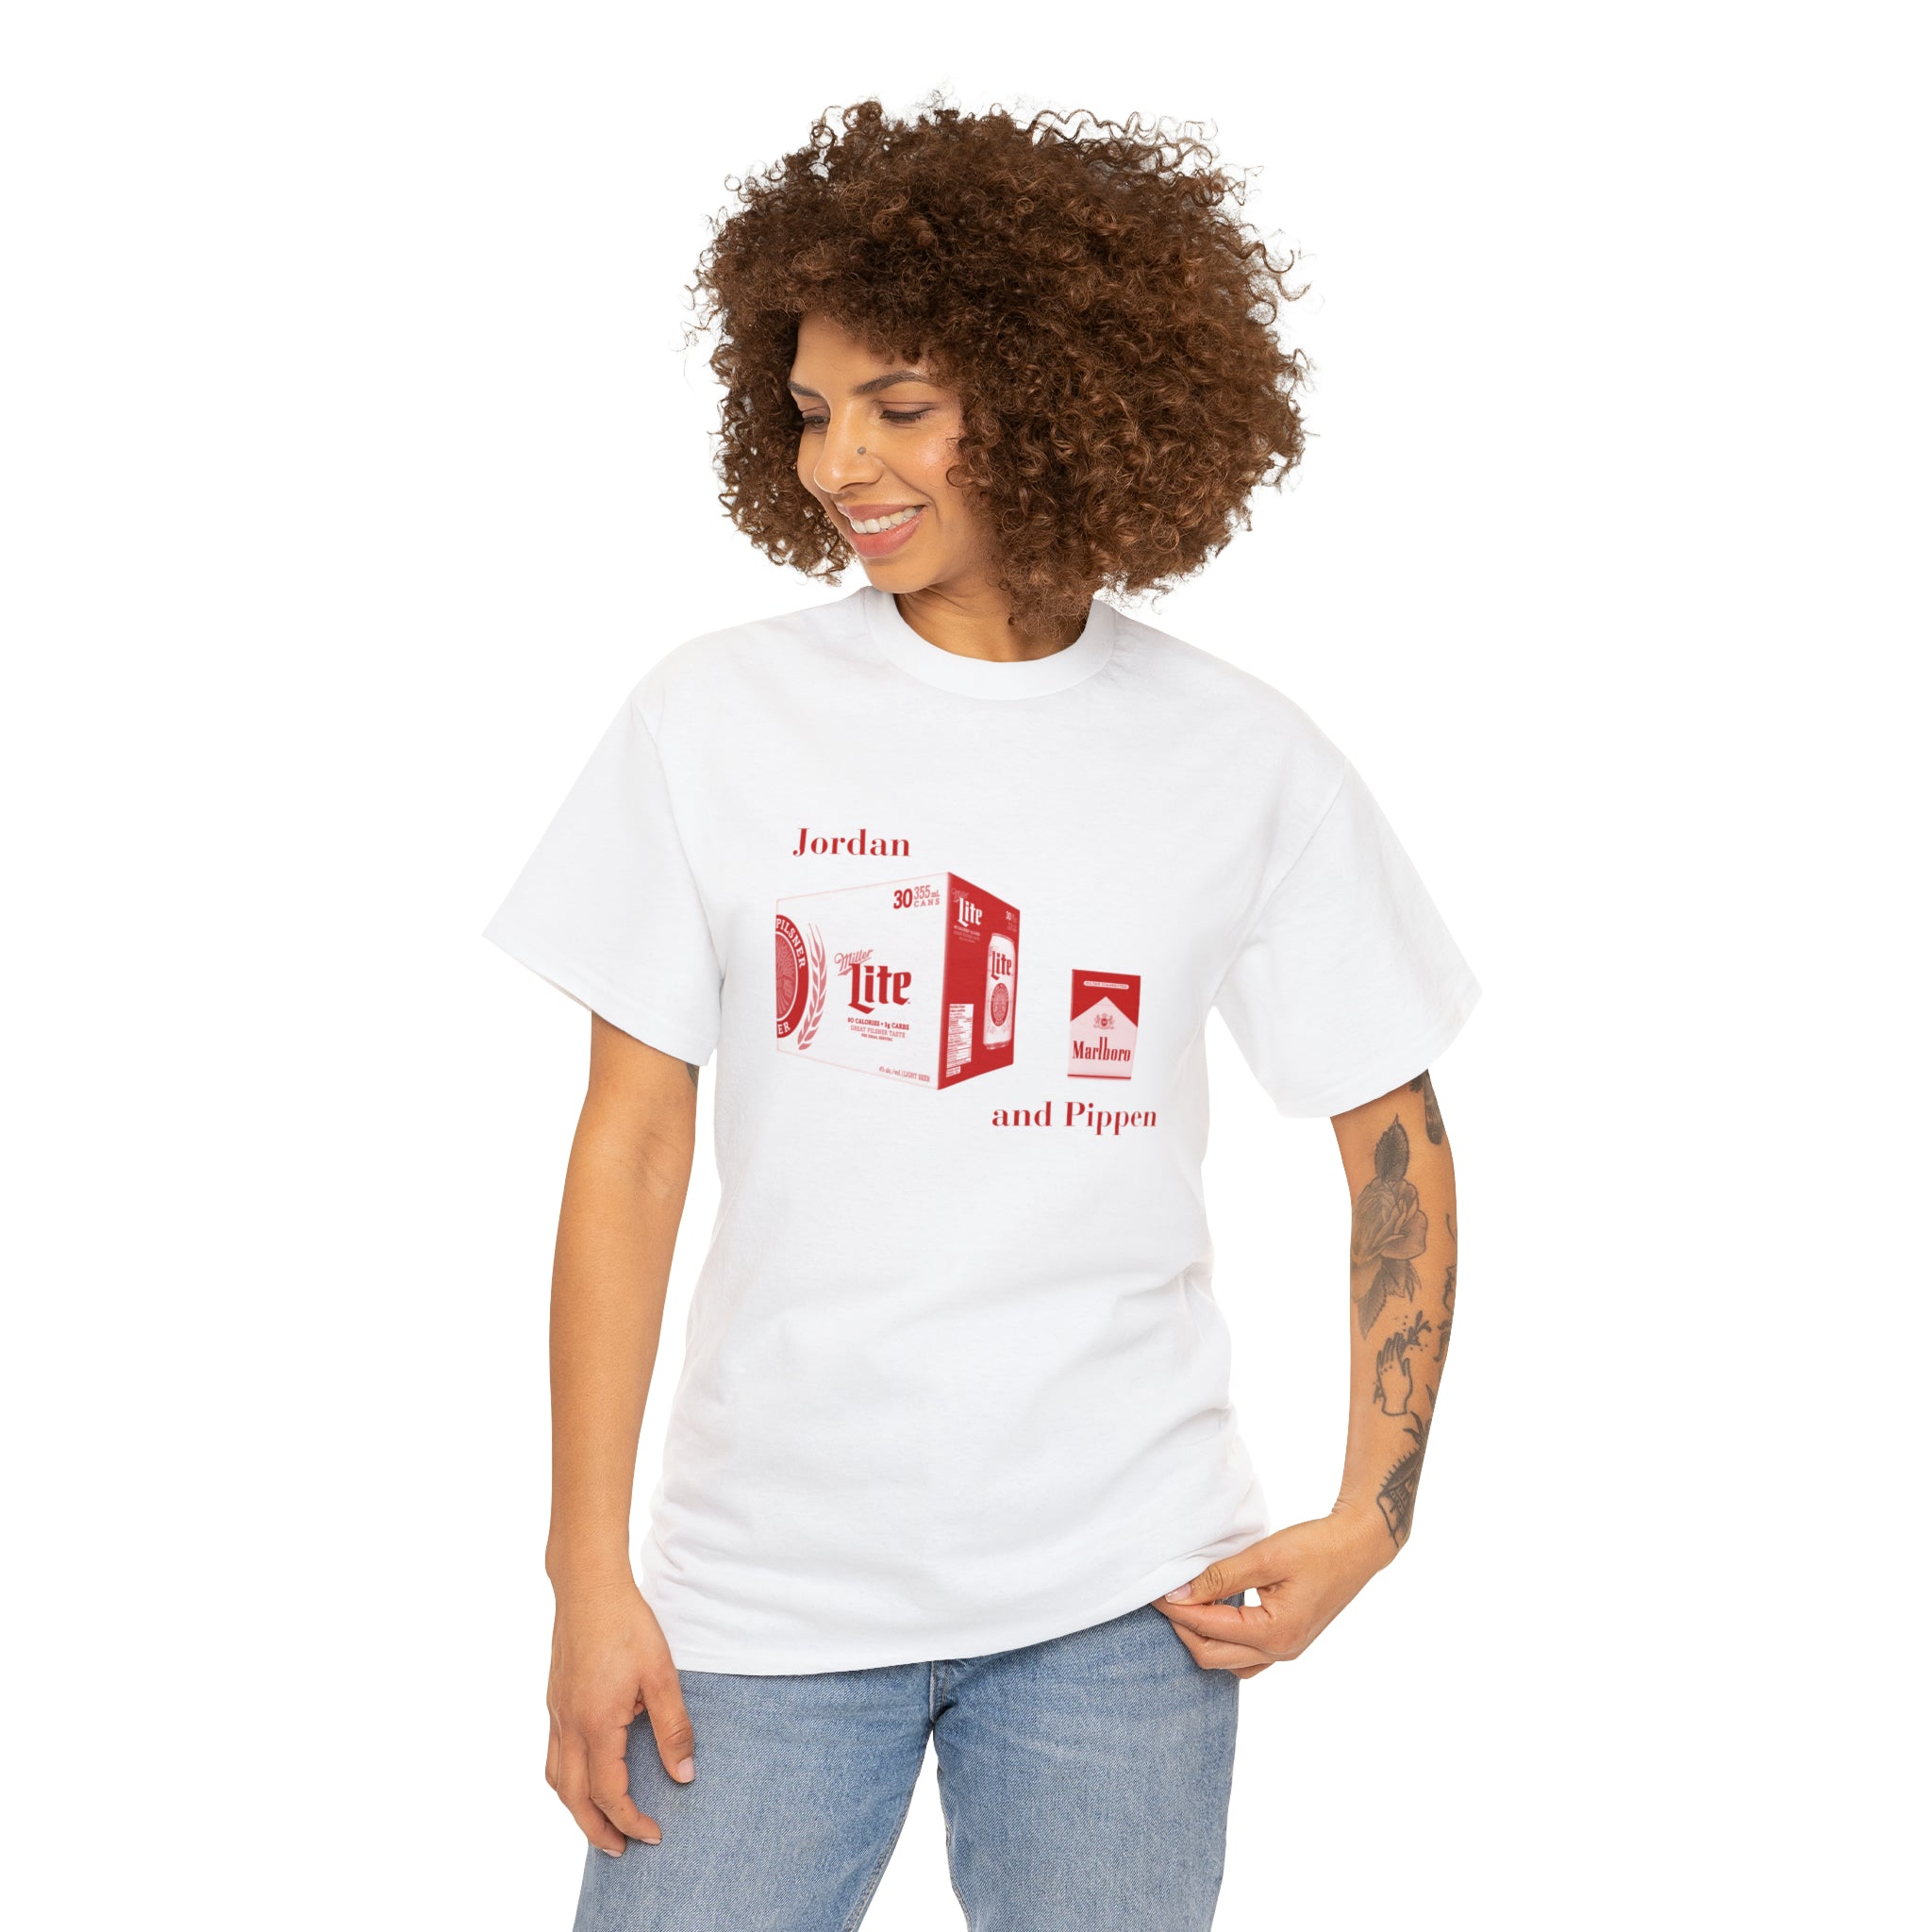 Jordan and Pippen Miller Lites and Cigarettes - Unisex Heavy Cotton Tee